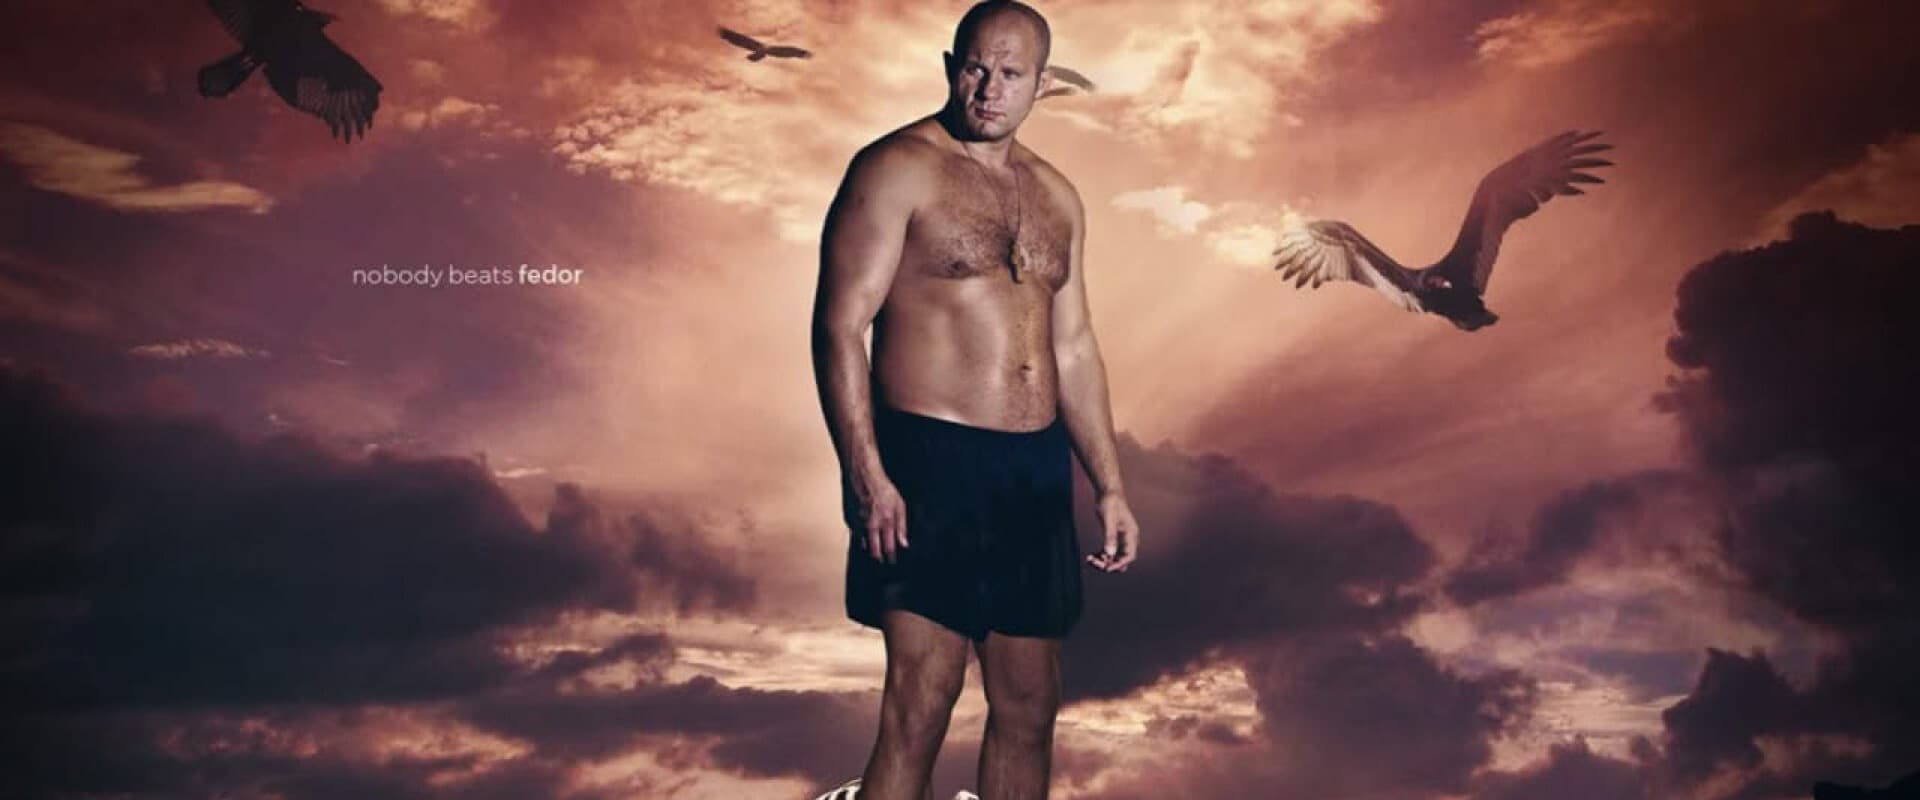 Fedor: The Baddest Man On The Planet